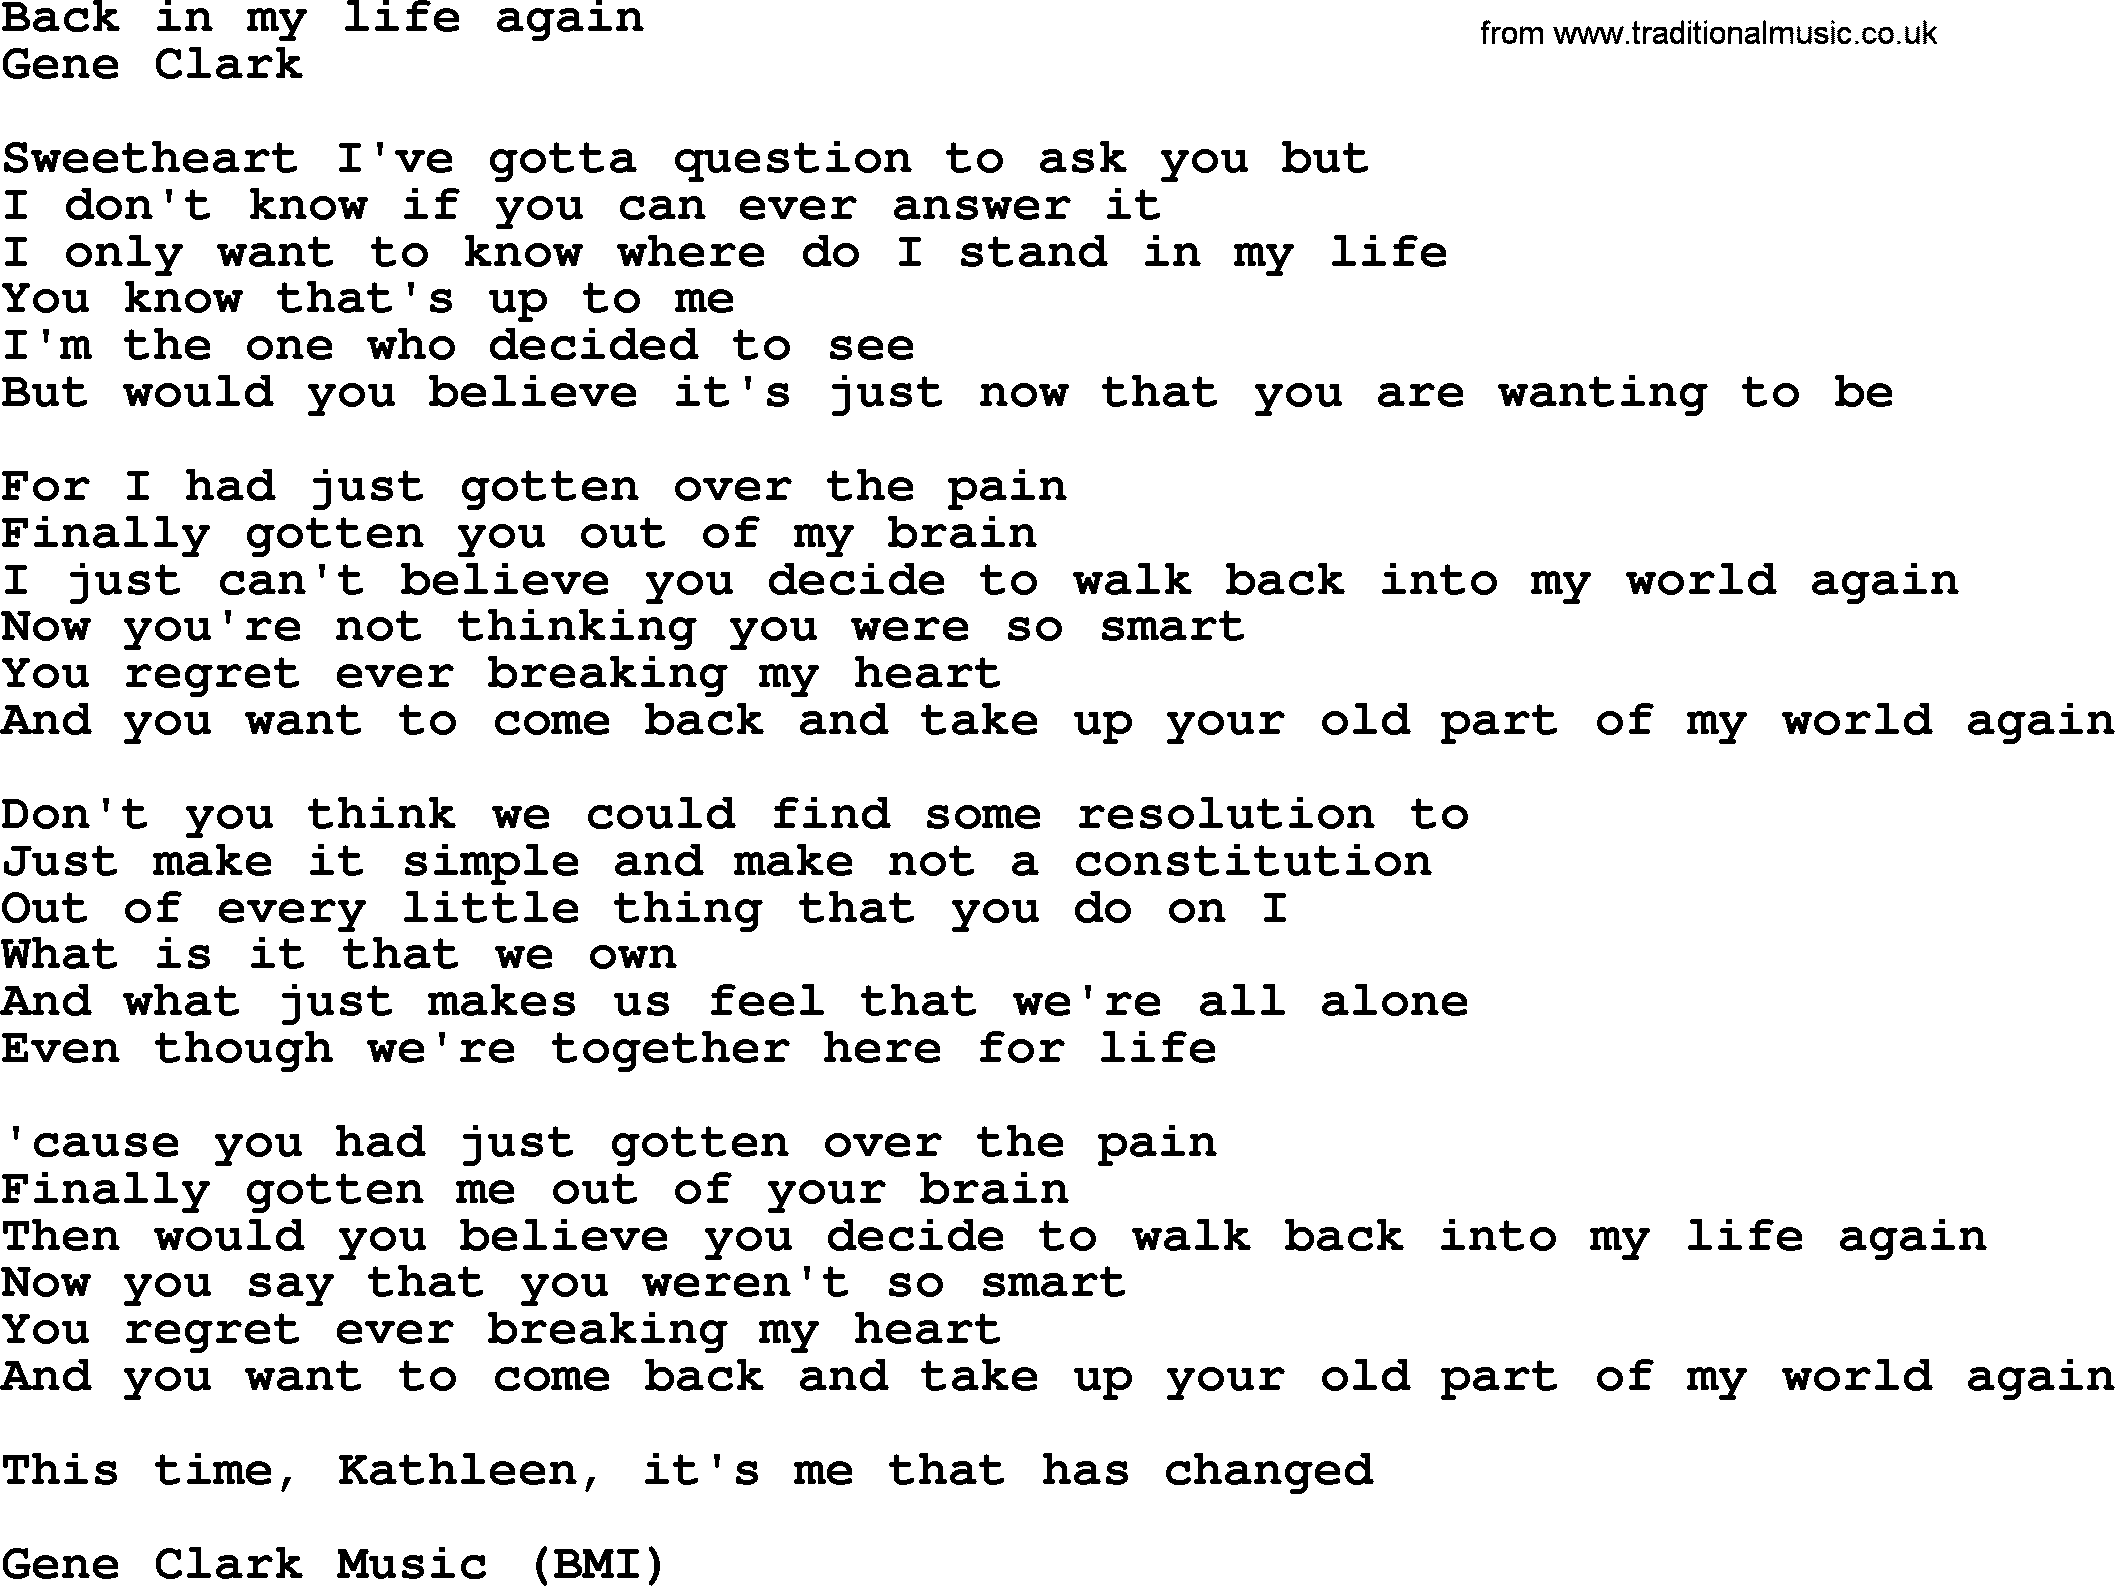 The Byrds song Back In My Life Again, lyrics